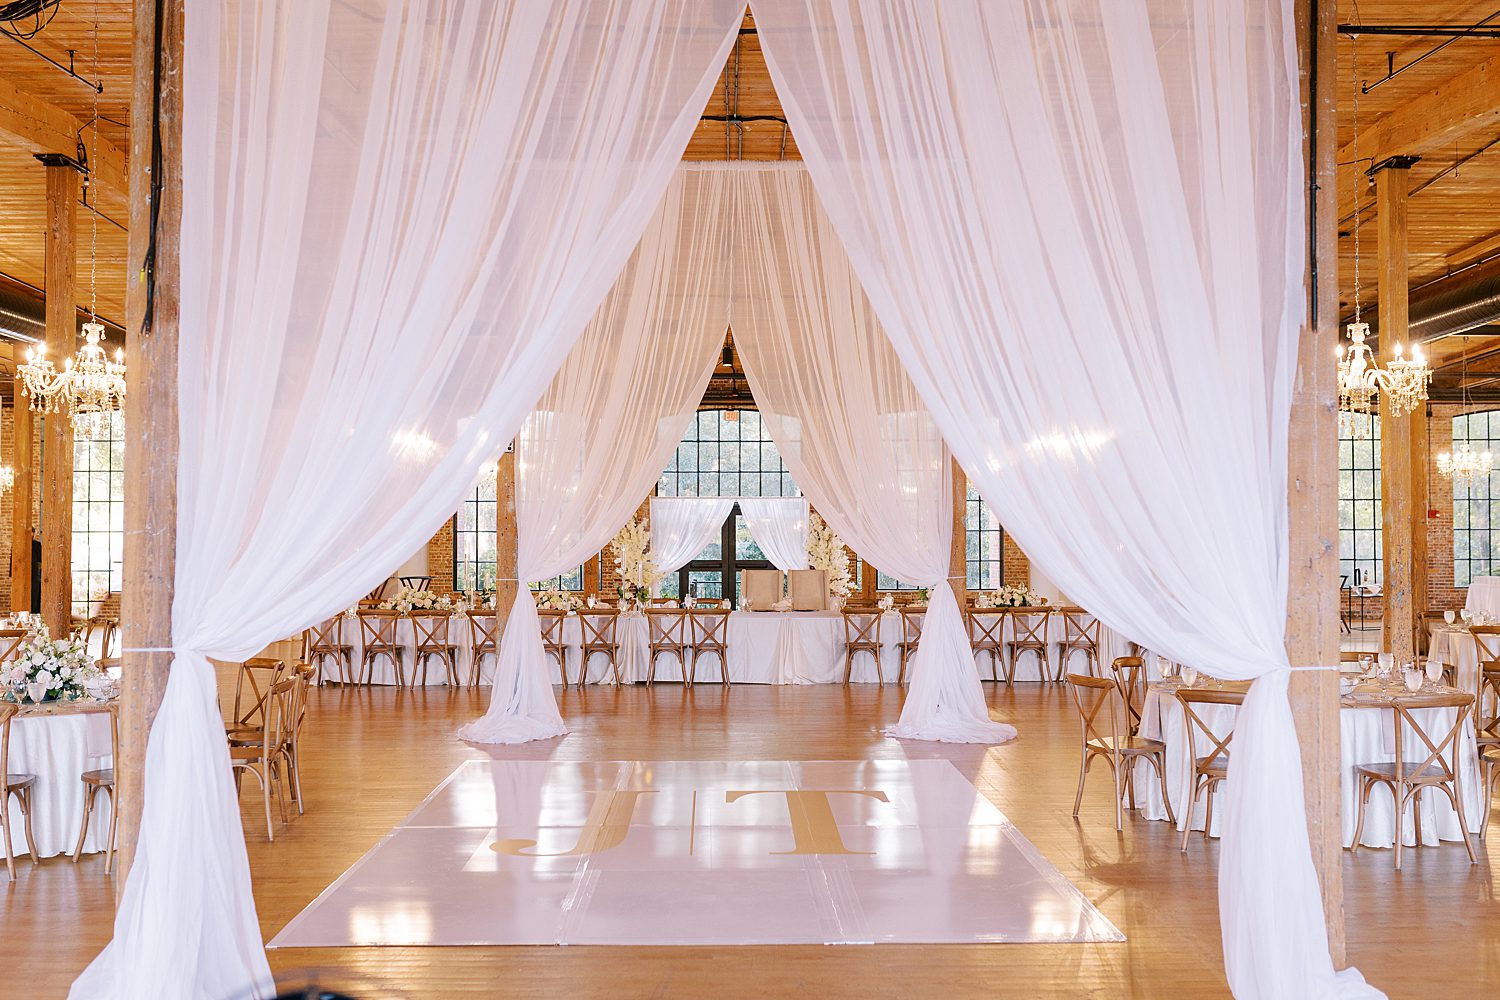 dance floor under white curtains at The Bibb Mill Event Center 